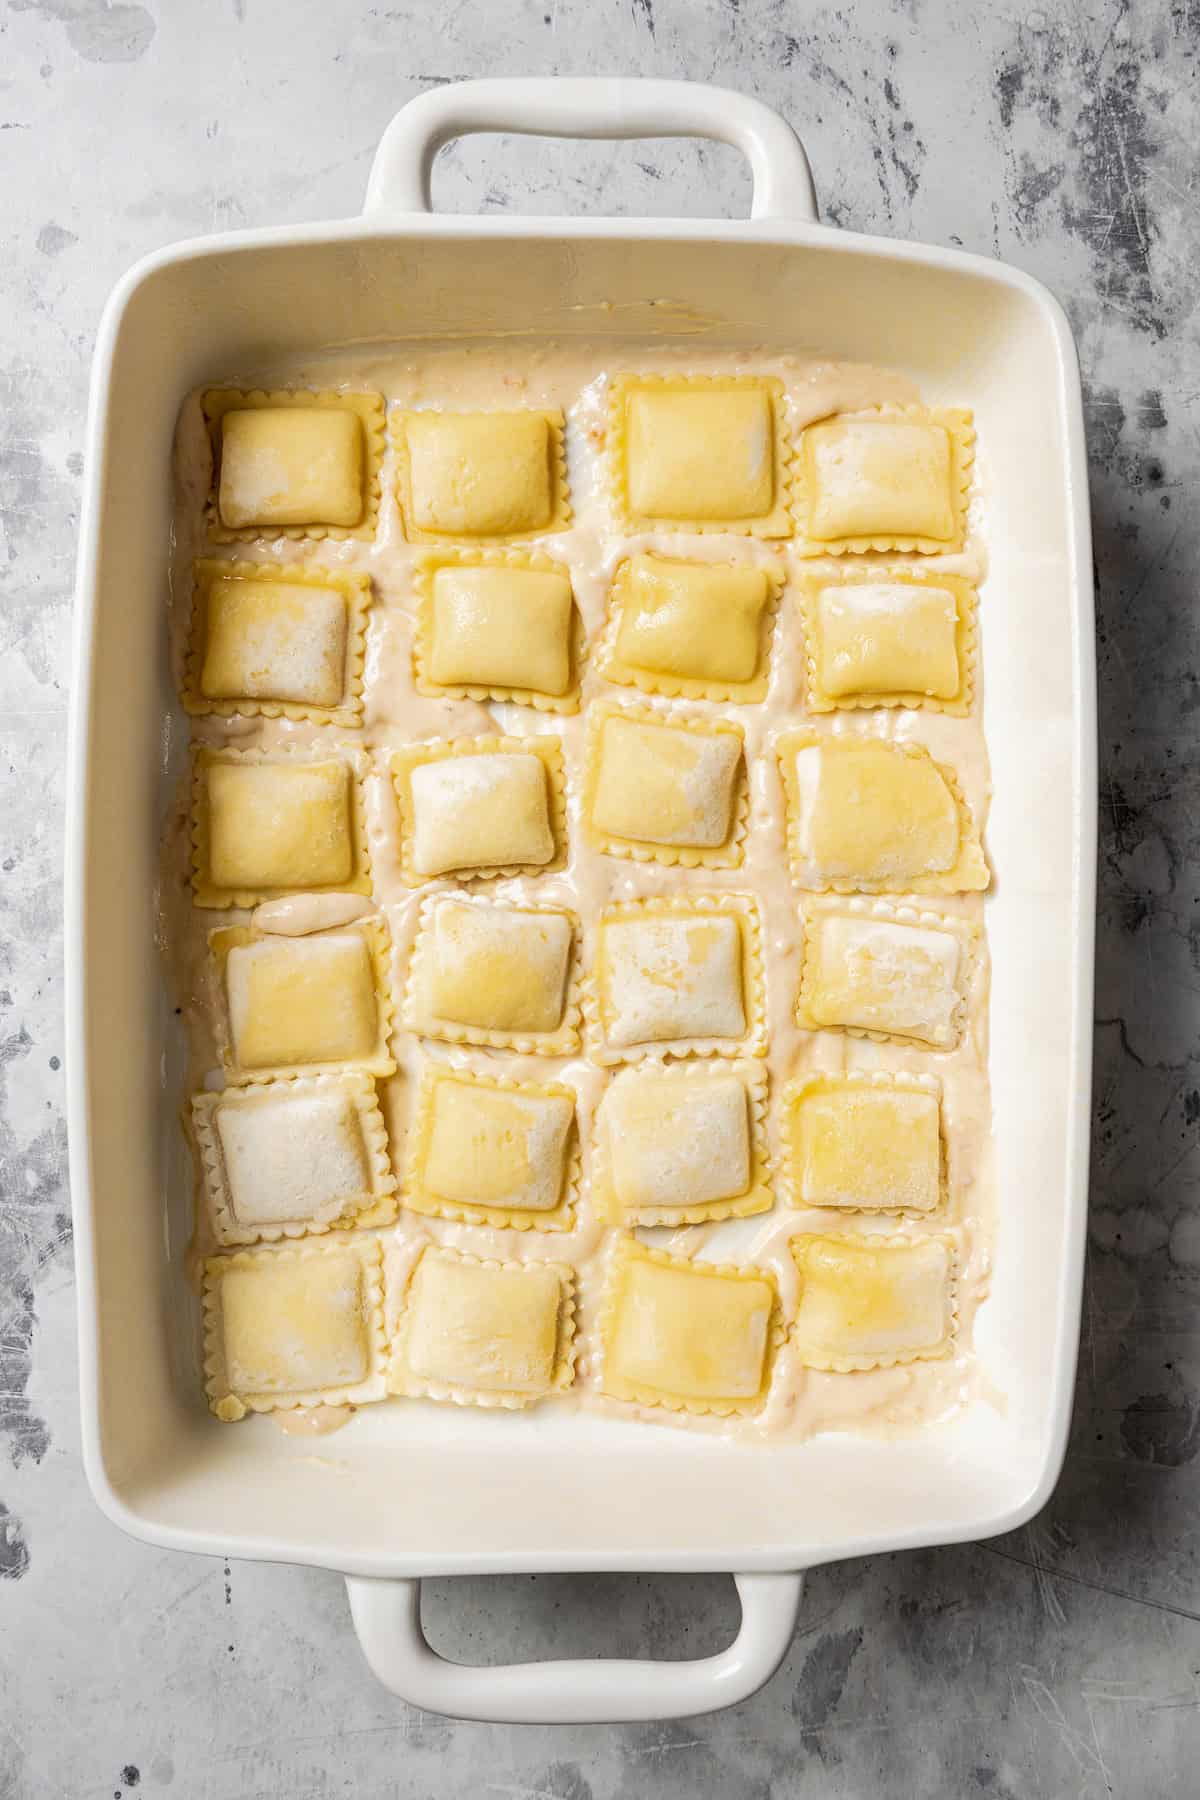 Raviolis arranged in rows in the bottom of a ceramic baking dish.